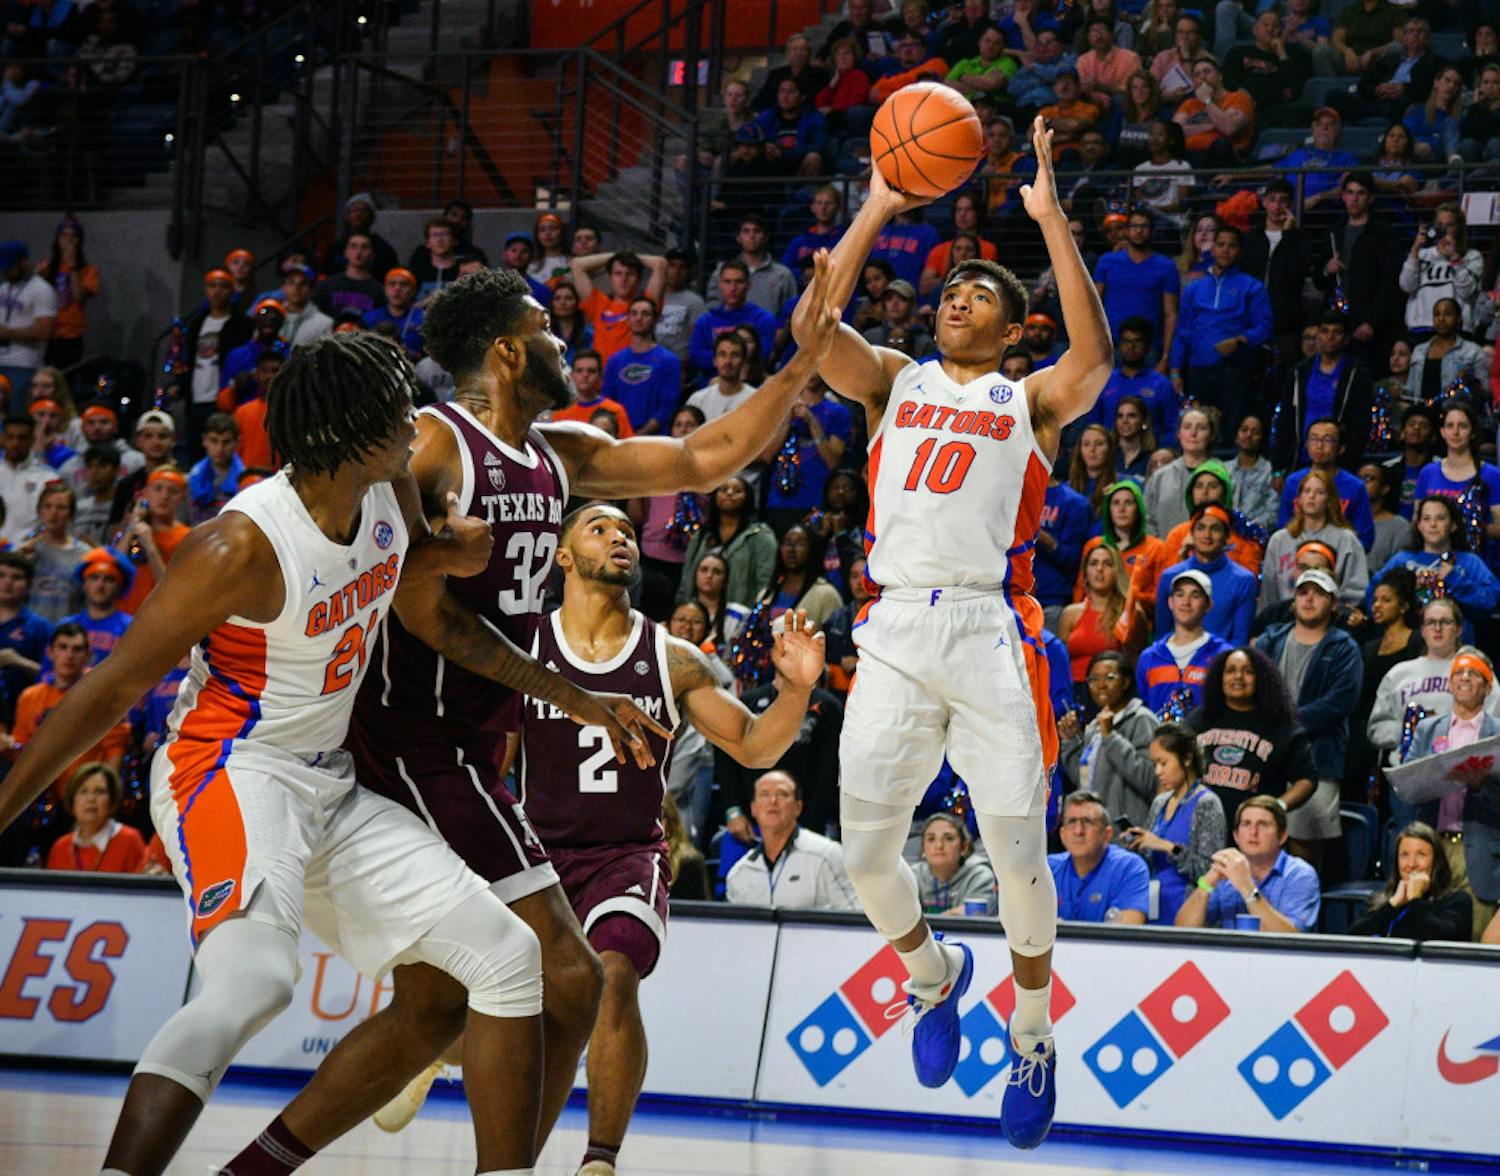 Freshman guard Noahe Locke is the Gators' second-leading scorer this season, averaging 11.4 points per game. He scored a career-high 27 points against Texas A&amp;M on Tuesday Night.